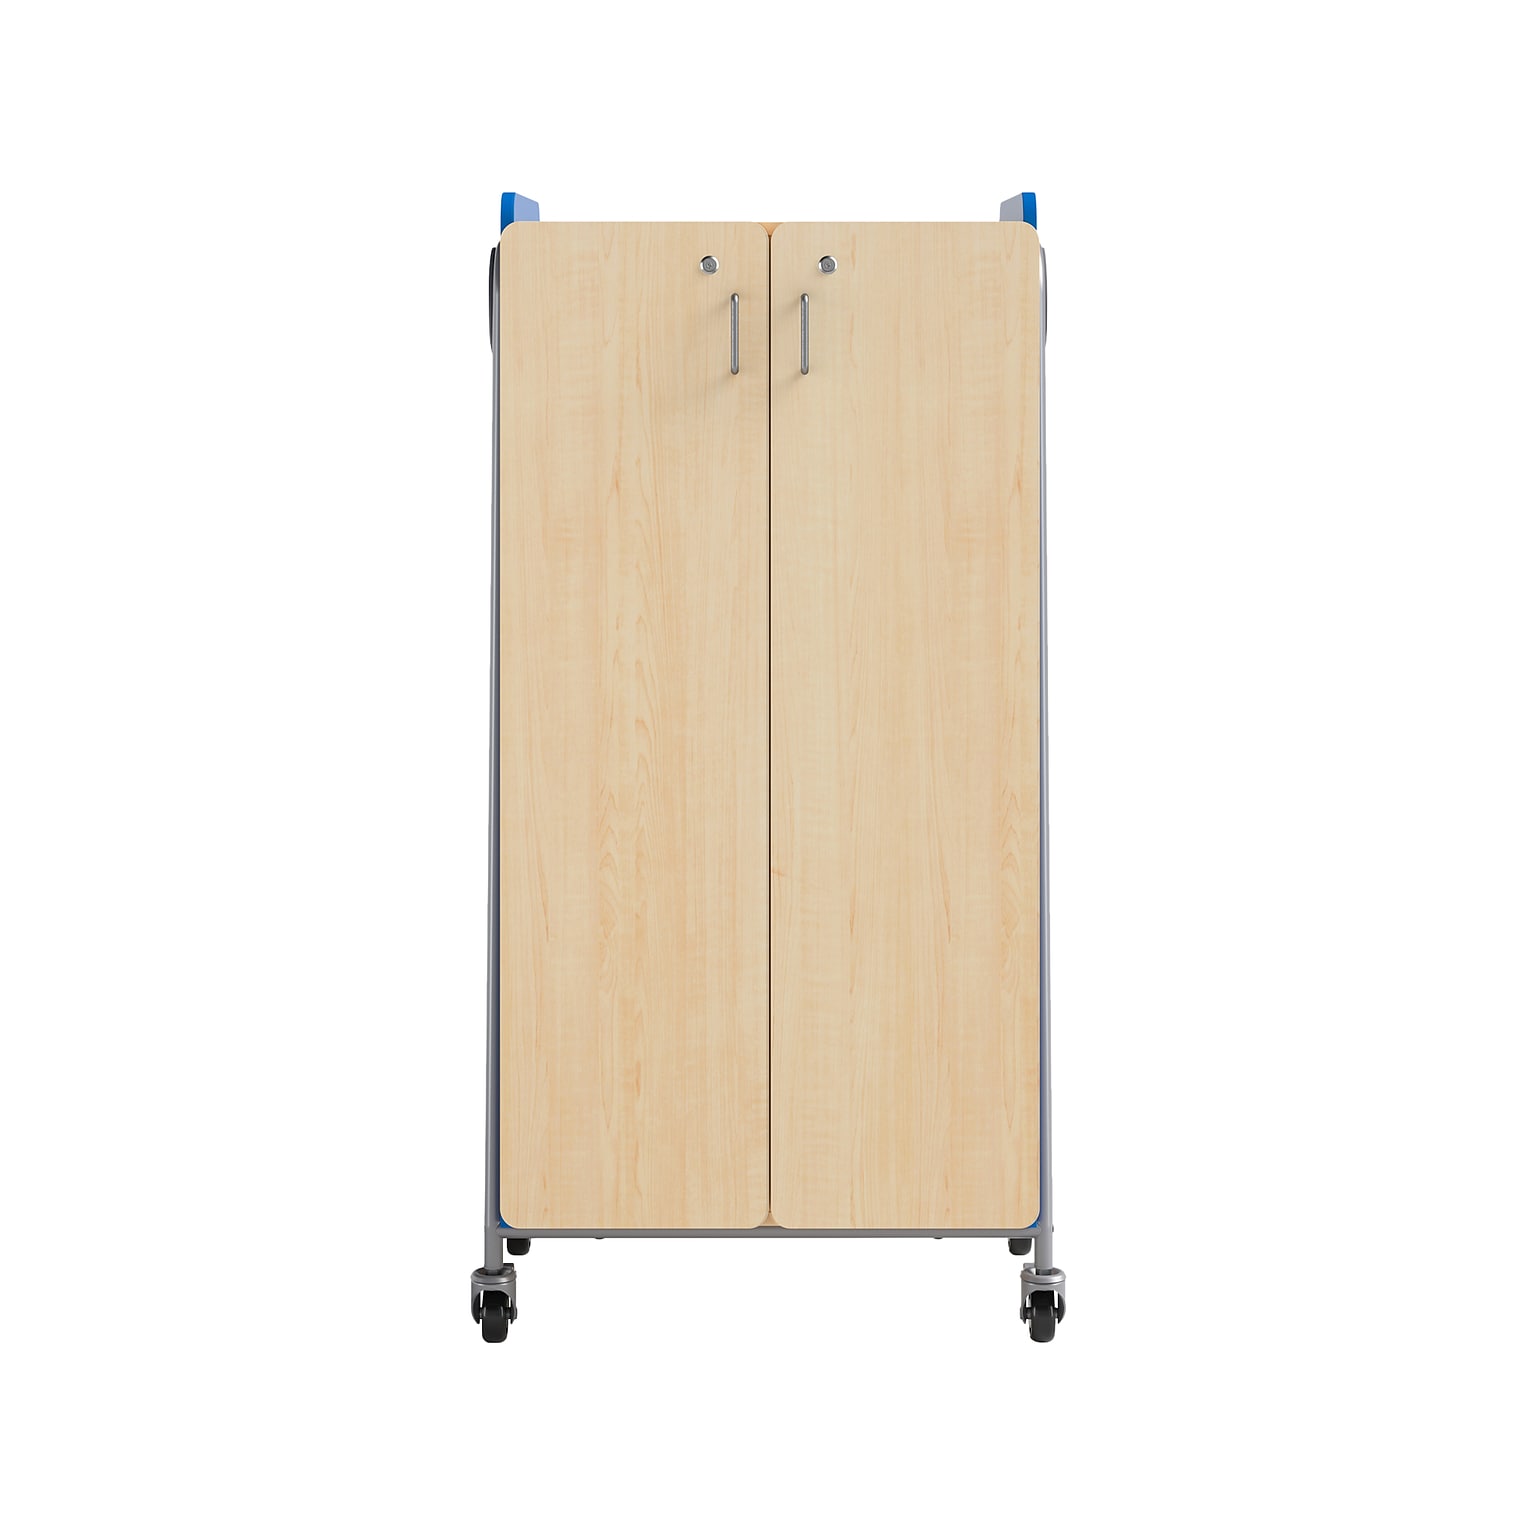 Safco Whiffle Typical 15 60 x 30 Particle Board Double-Column Mobile Storage, Spectrum Blue (3935SBU)